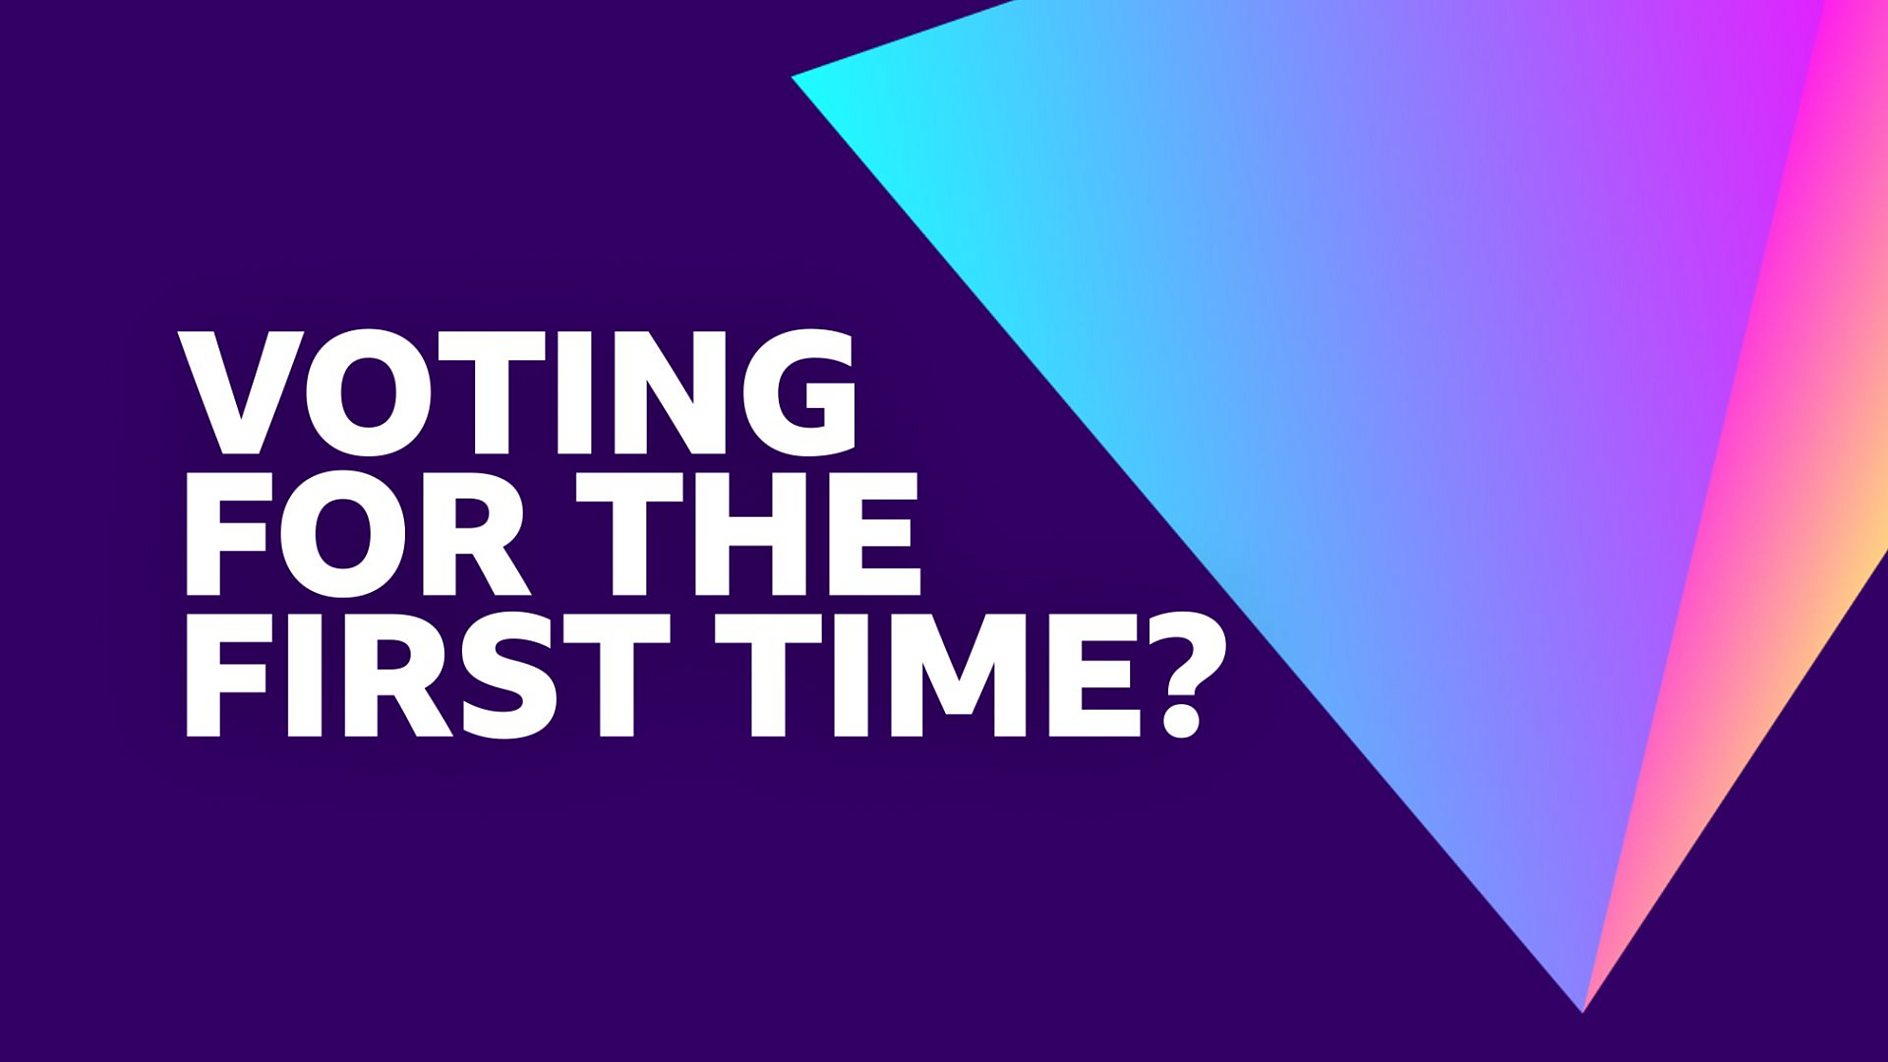 First-time voters targeted by BBC News, Radio 1 Newsbeat and BBC Three